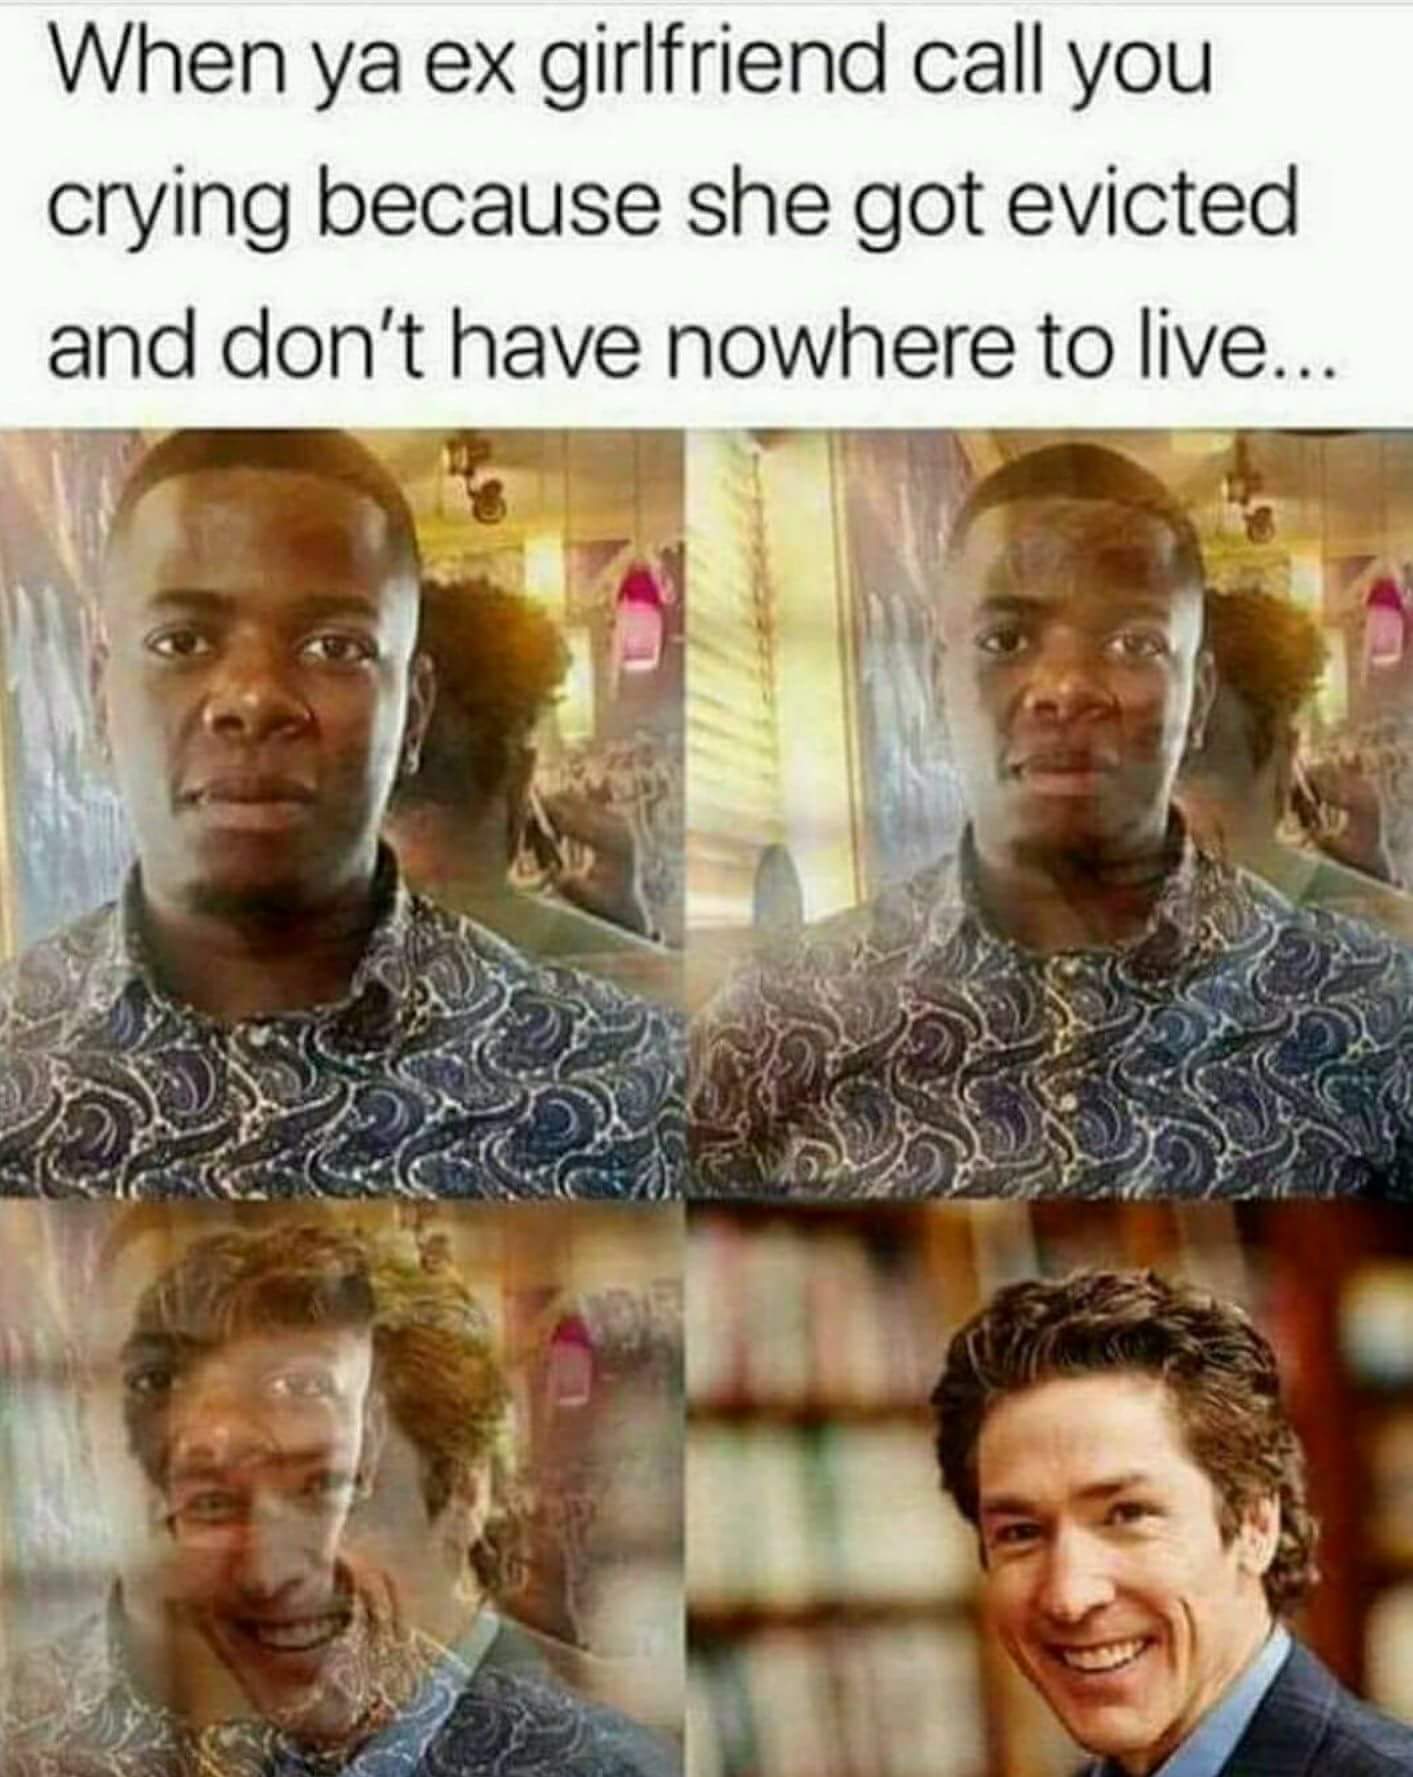 Funny meme about when your ex-girlfriend calls you crying because she got evicted and you turn into Joel Olsteen